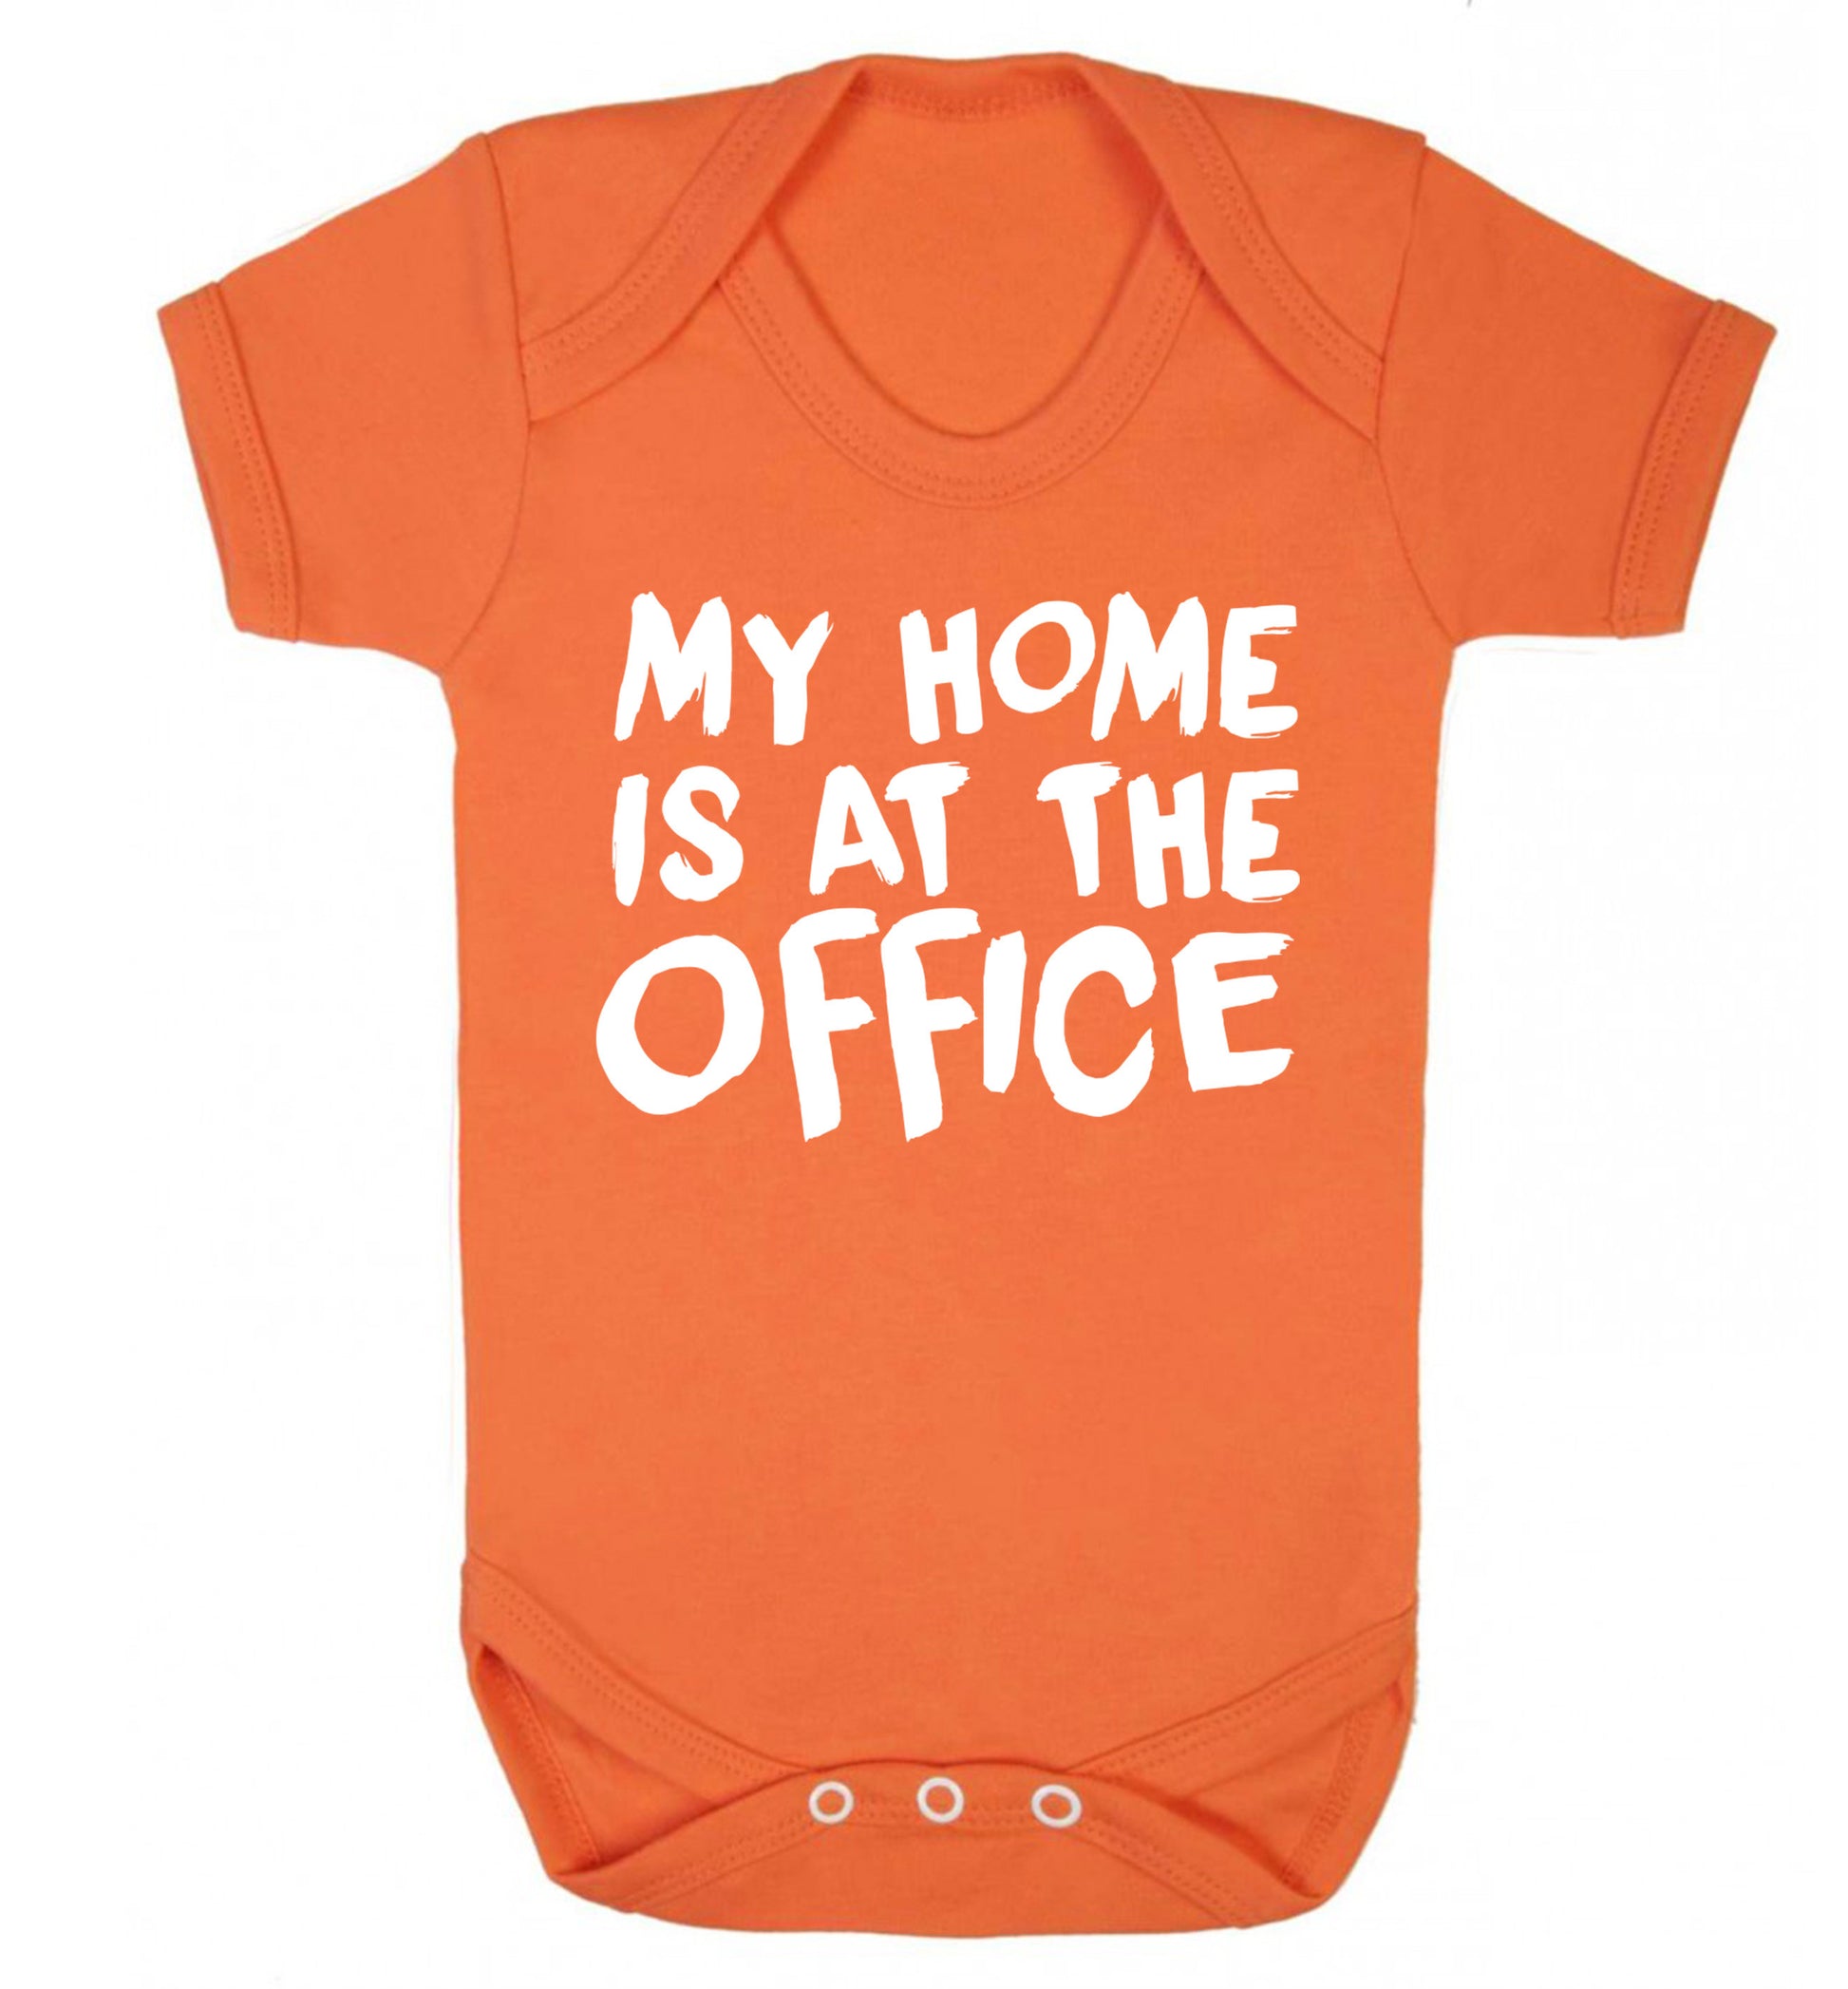 My home is at the office Baby Vest orange 18-24 months